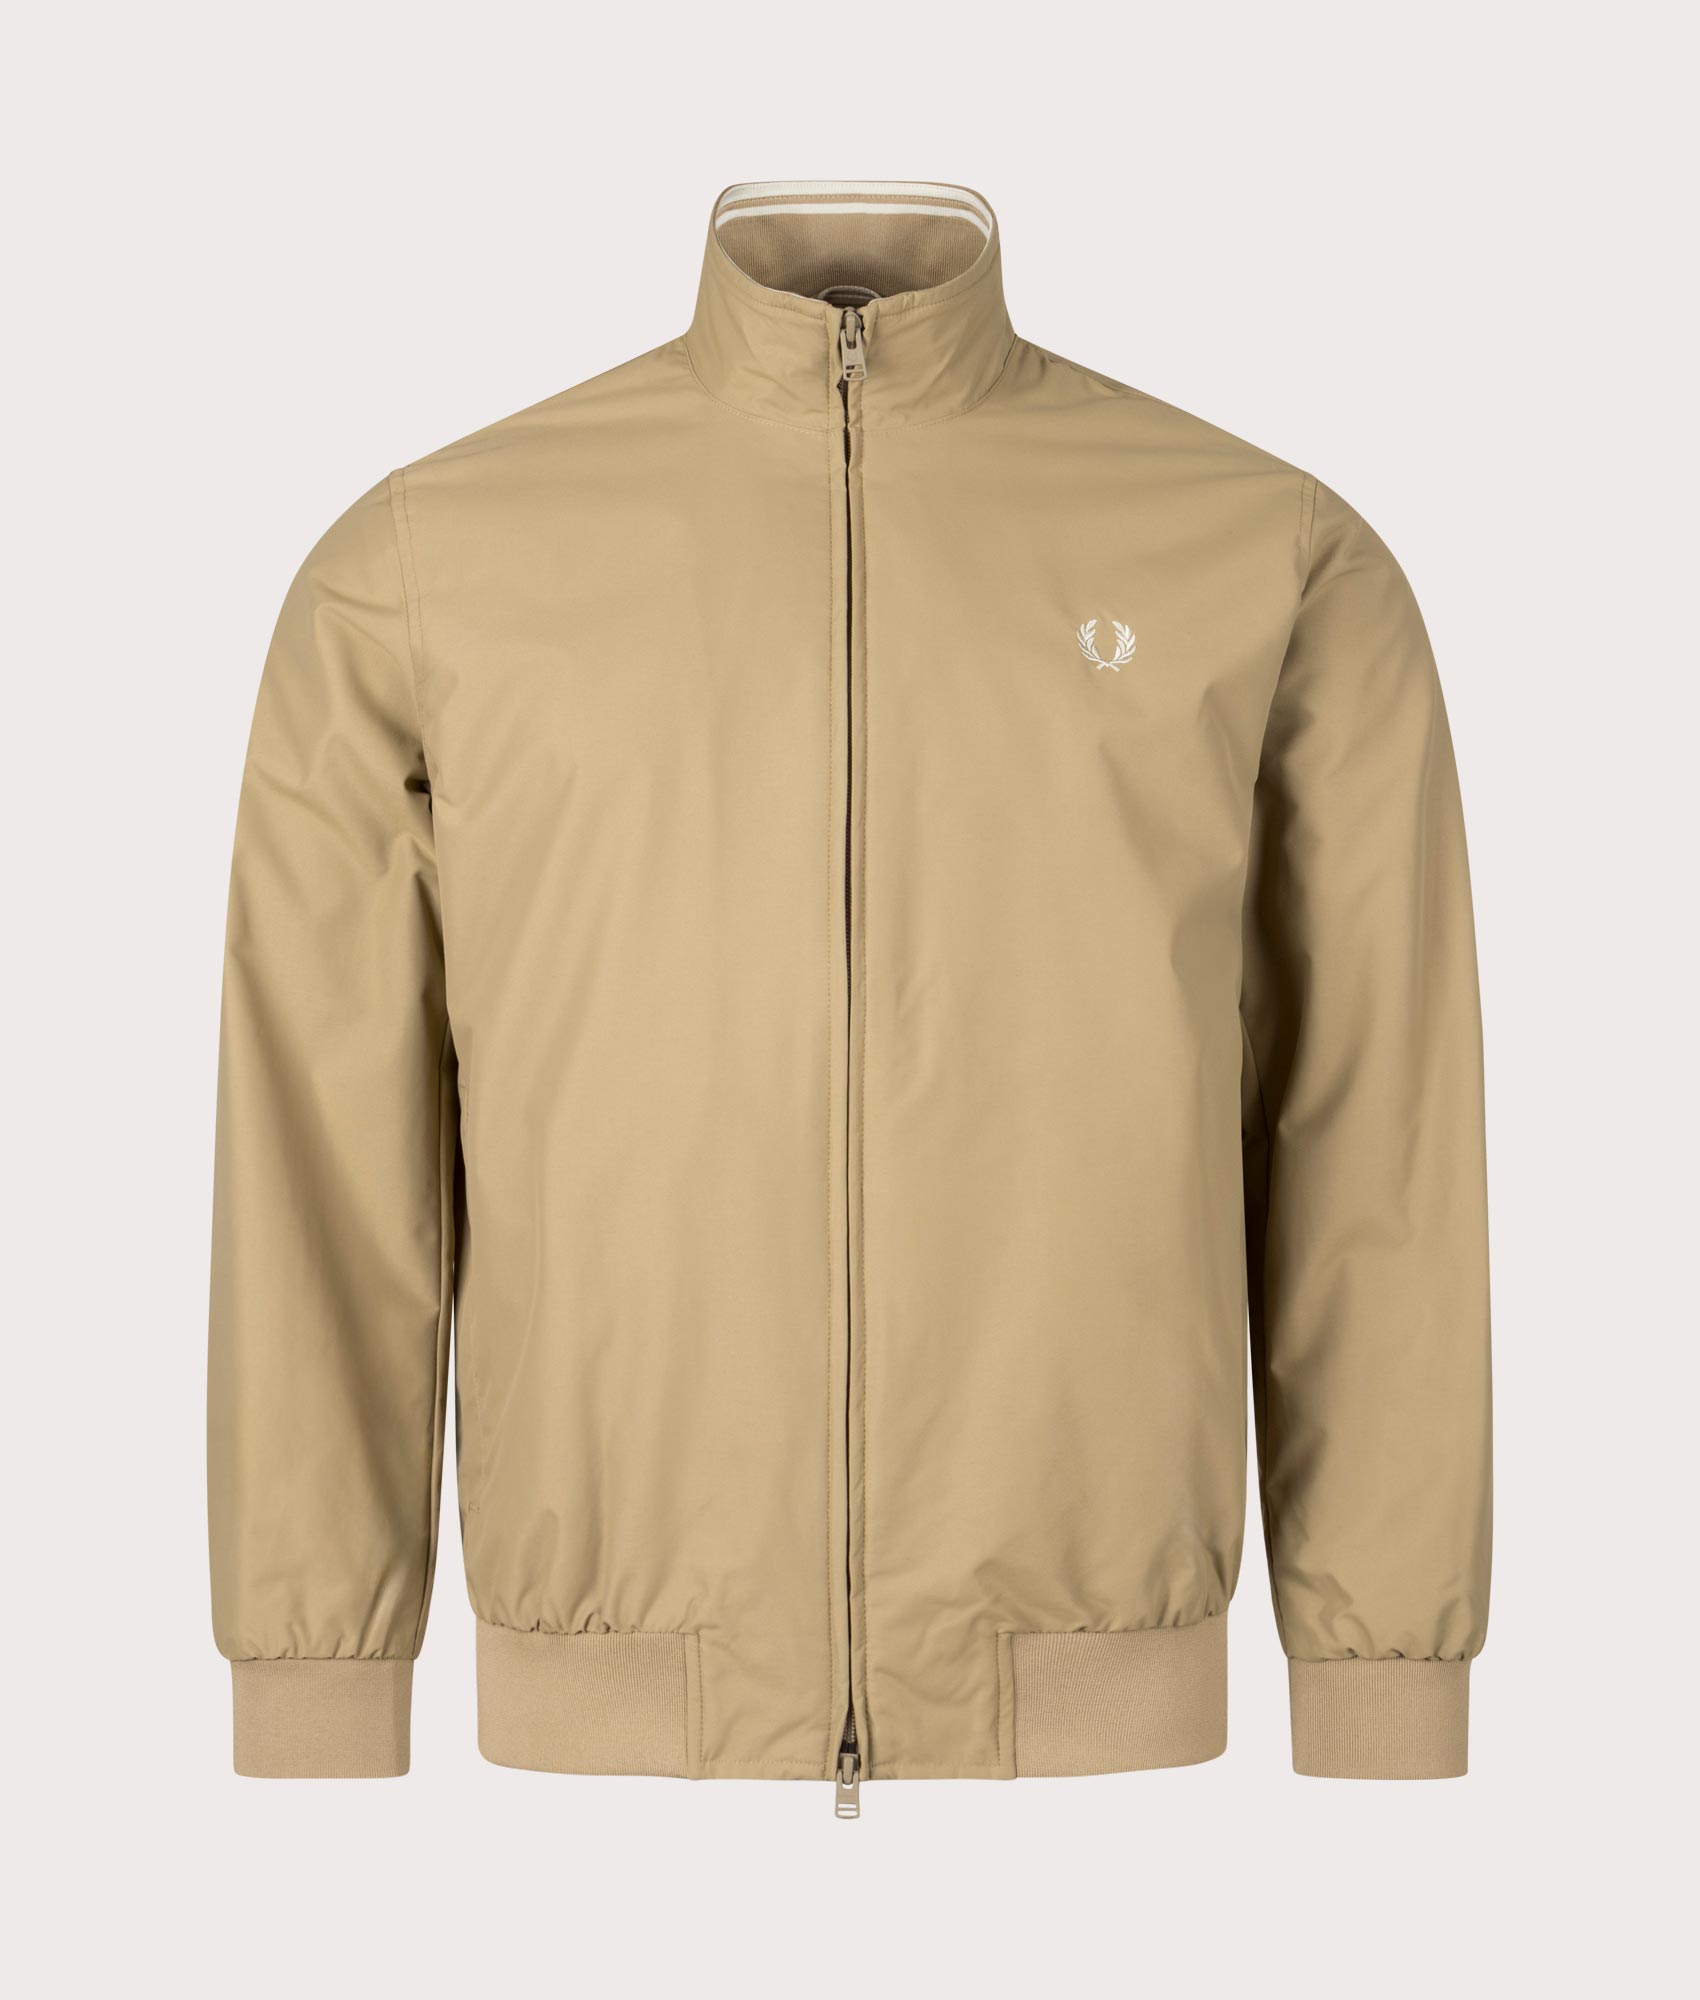 Fred Perry Mens Brentham Jacket - Colour: 363 Warm Stone - Size: XL